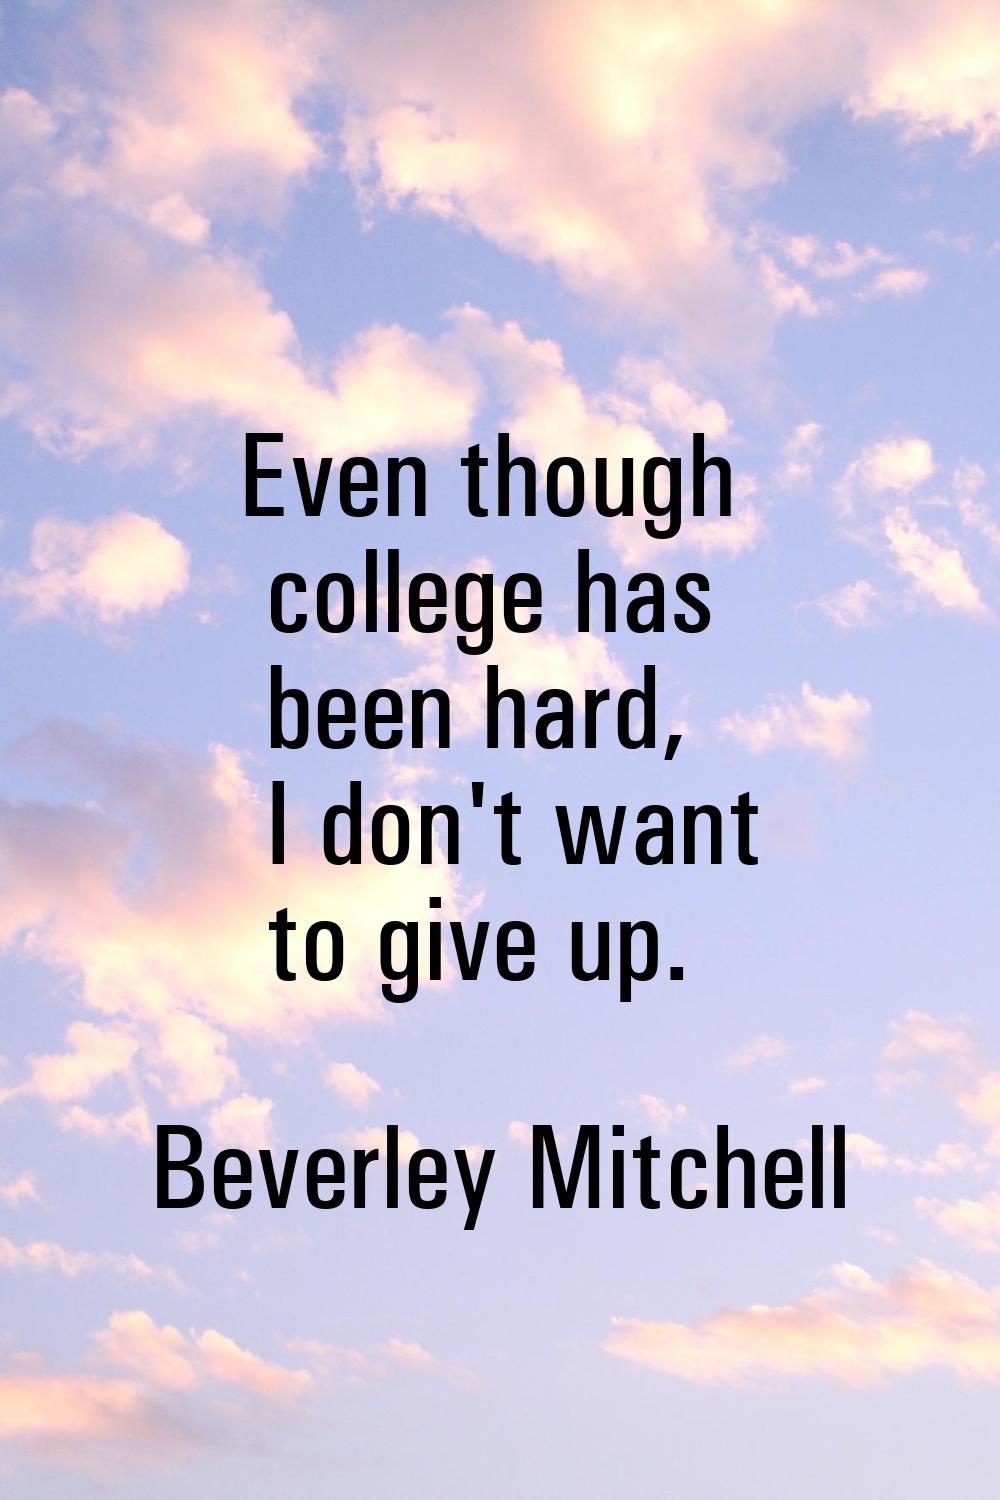 Even though college has been hard, I don't want to give up.